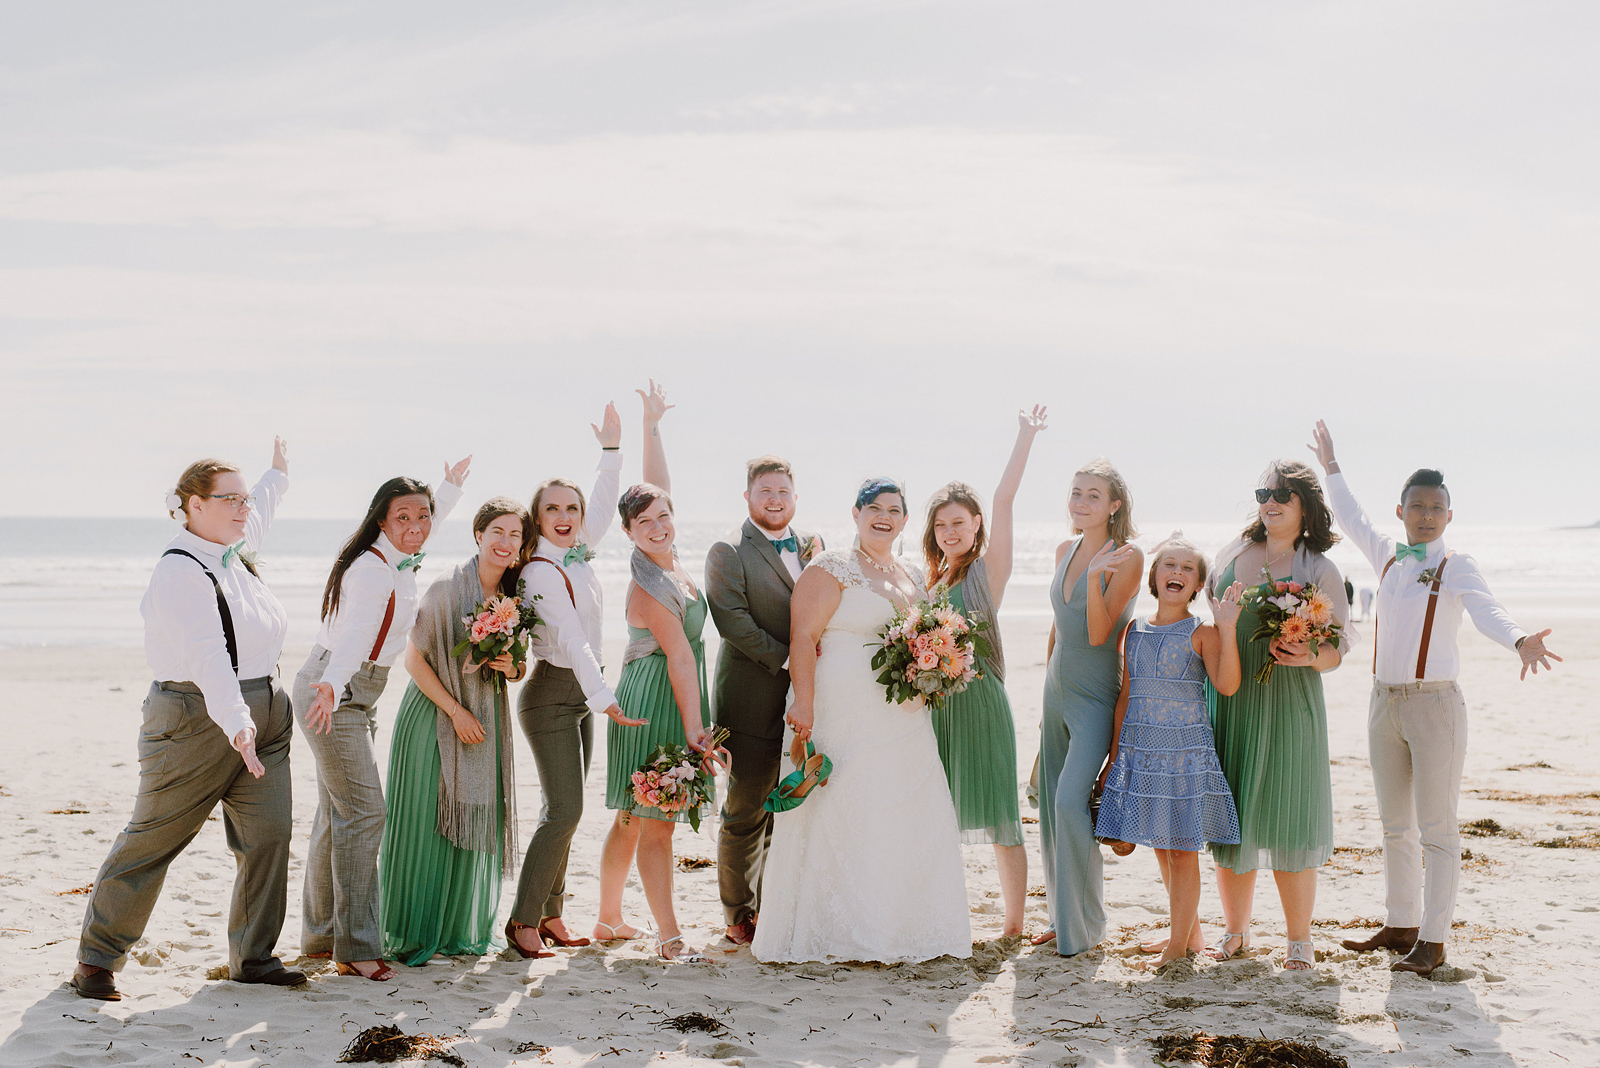 Group photo on the beach of the bride and groom with their spunky wedding party - Oceanside Community Club Wedding on the Oregon Coast” title=